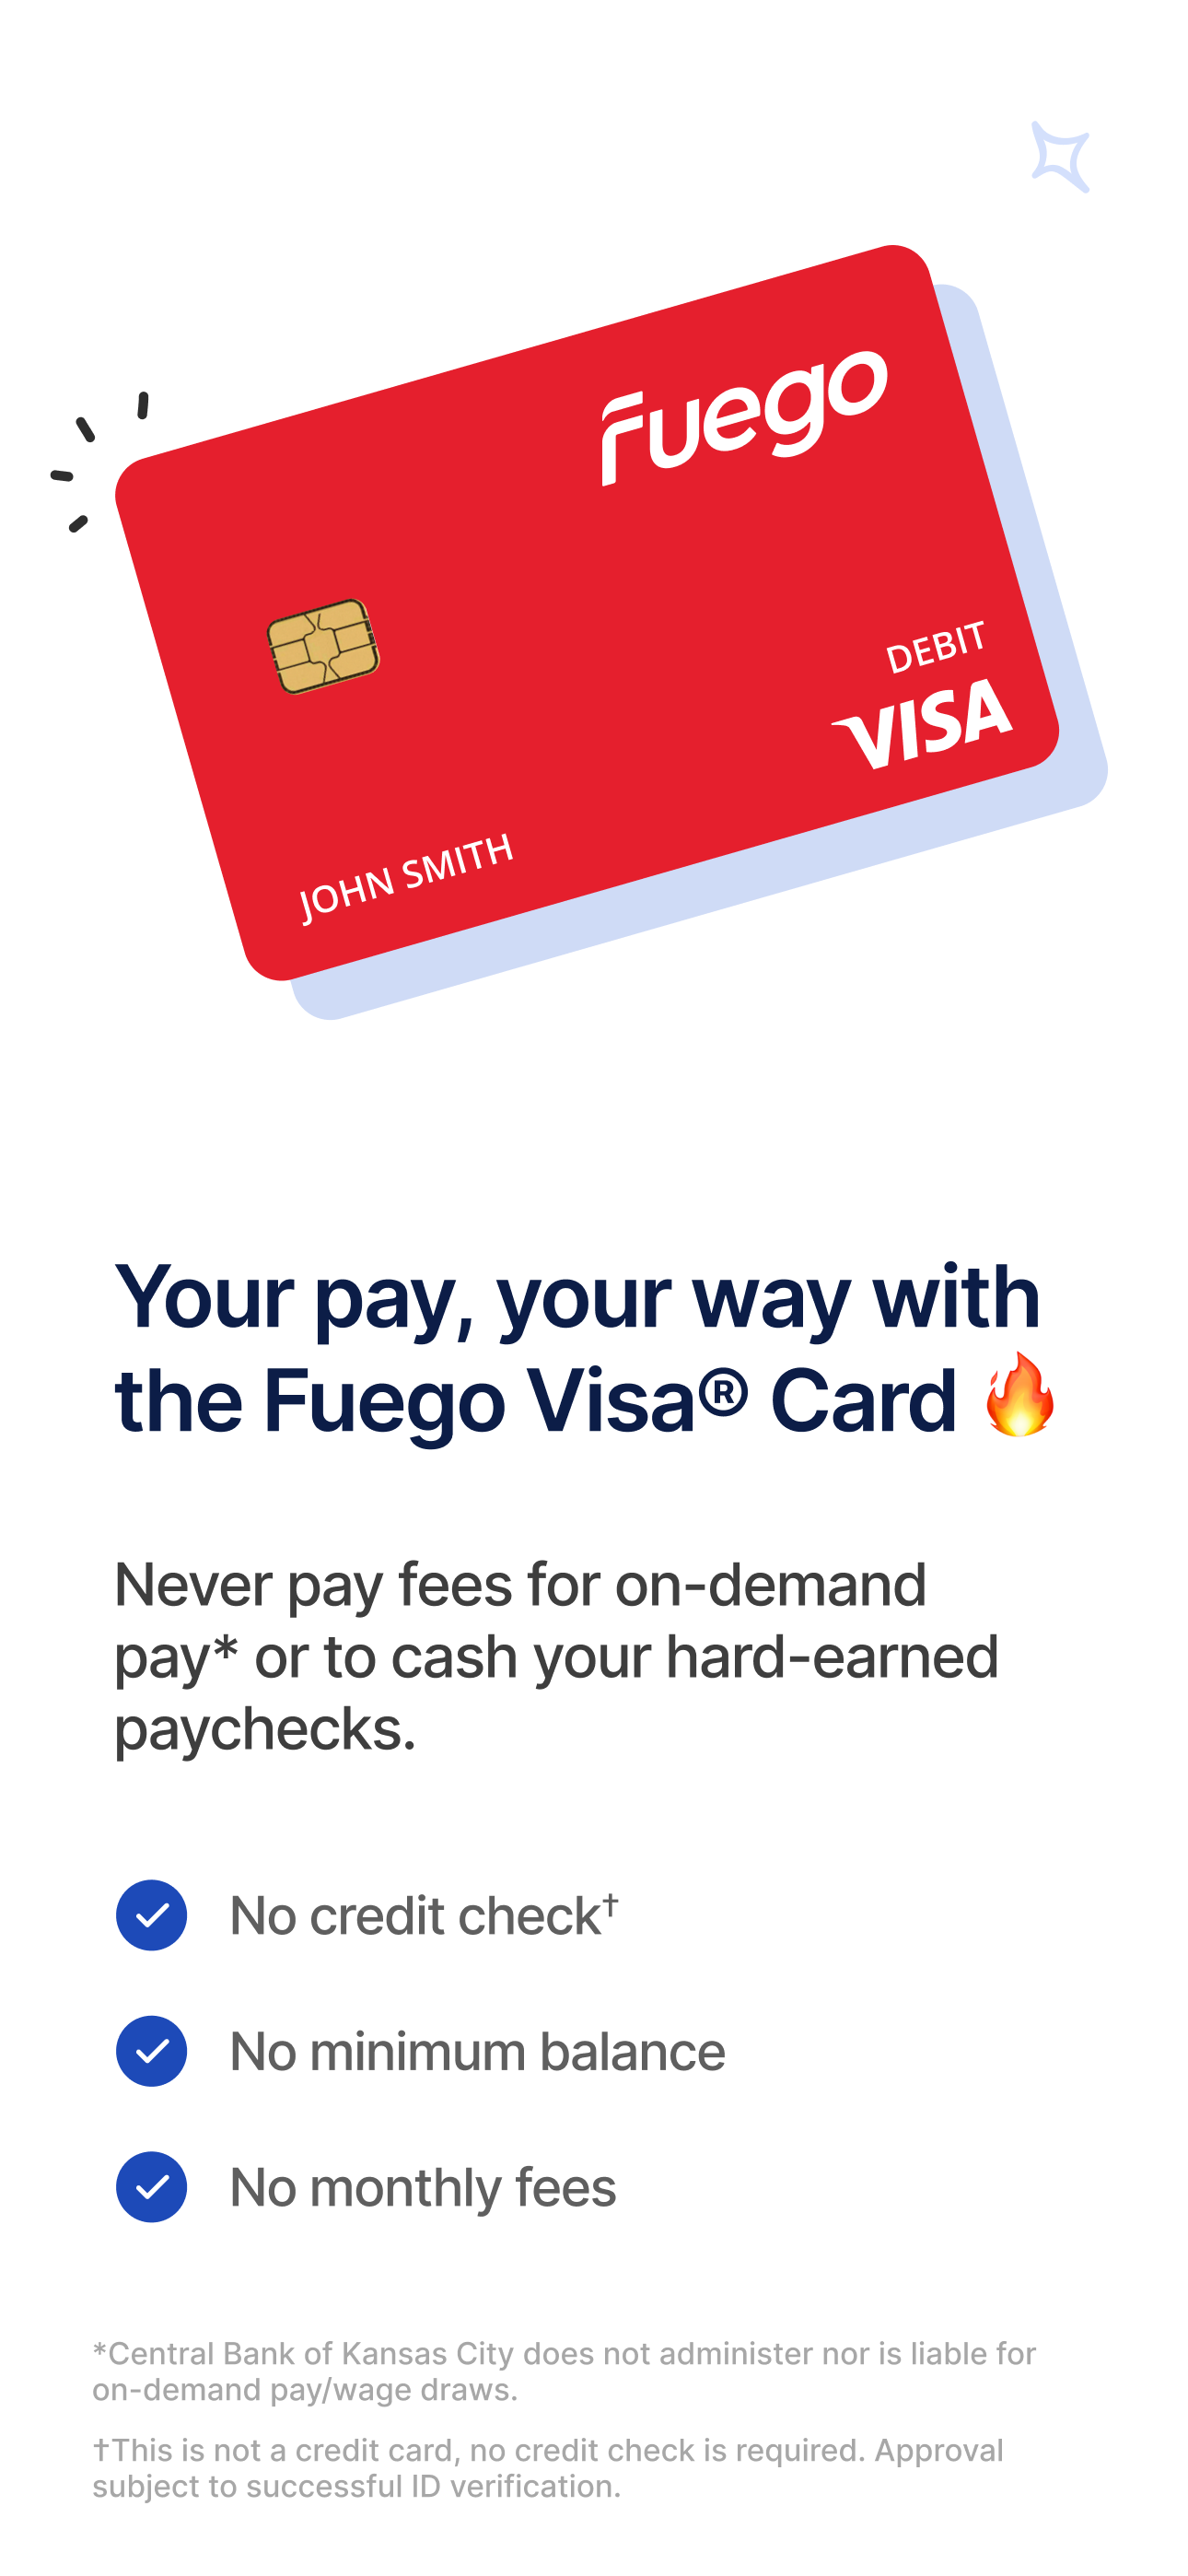 Your pay, your way with the Fuego Visa(C) Card